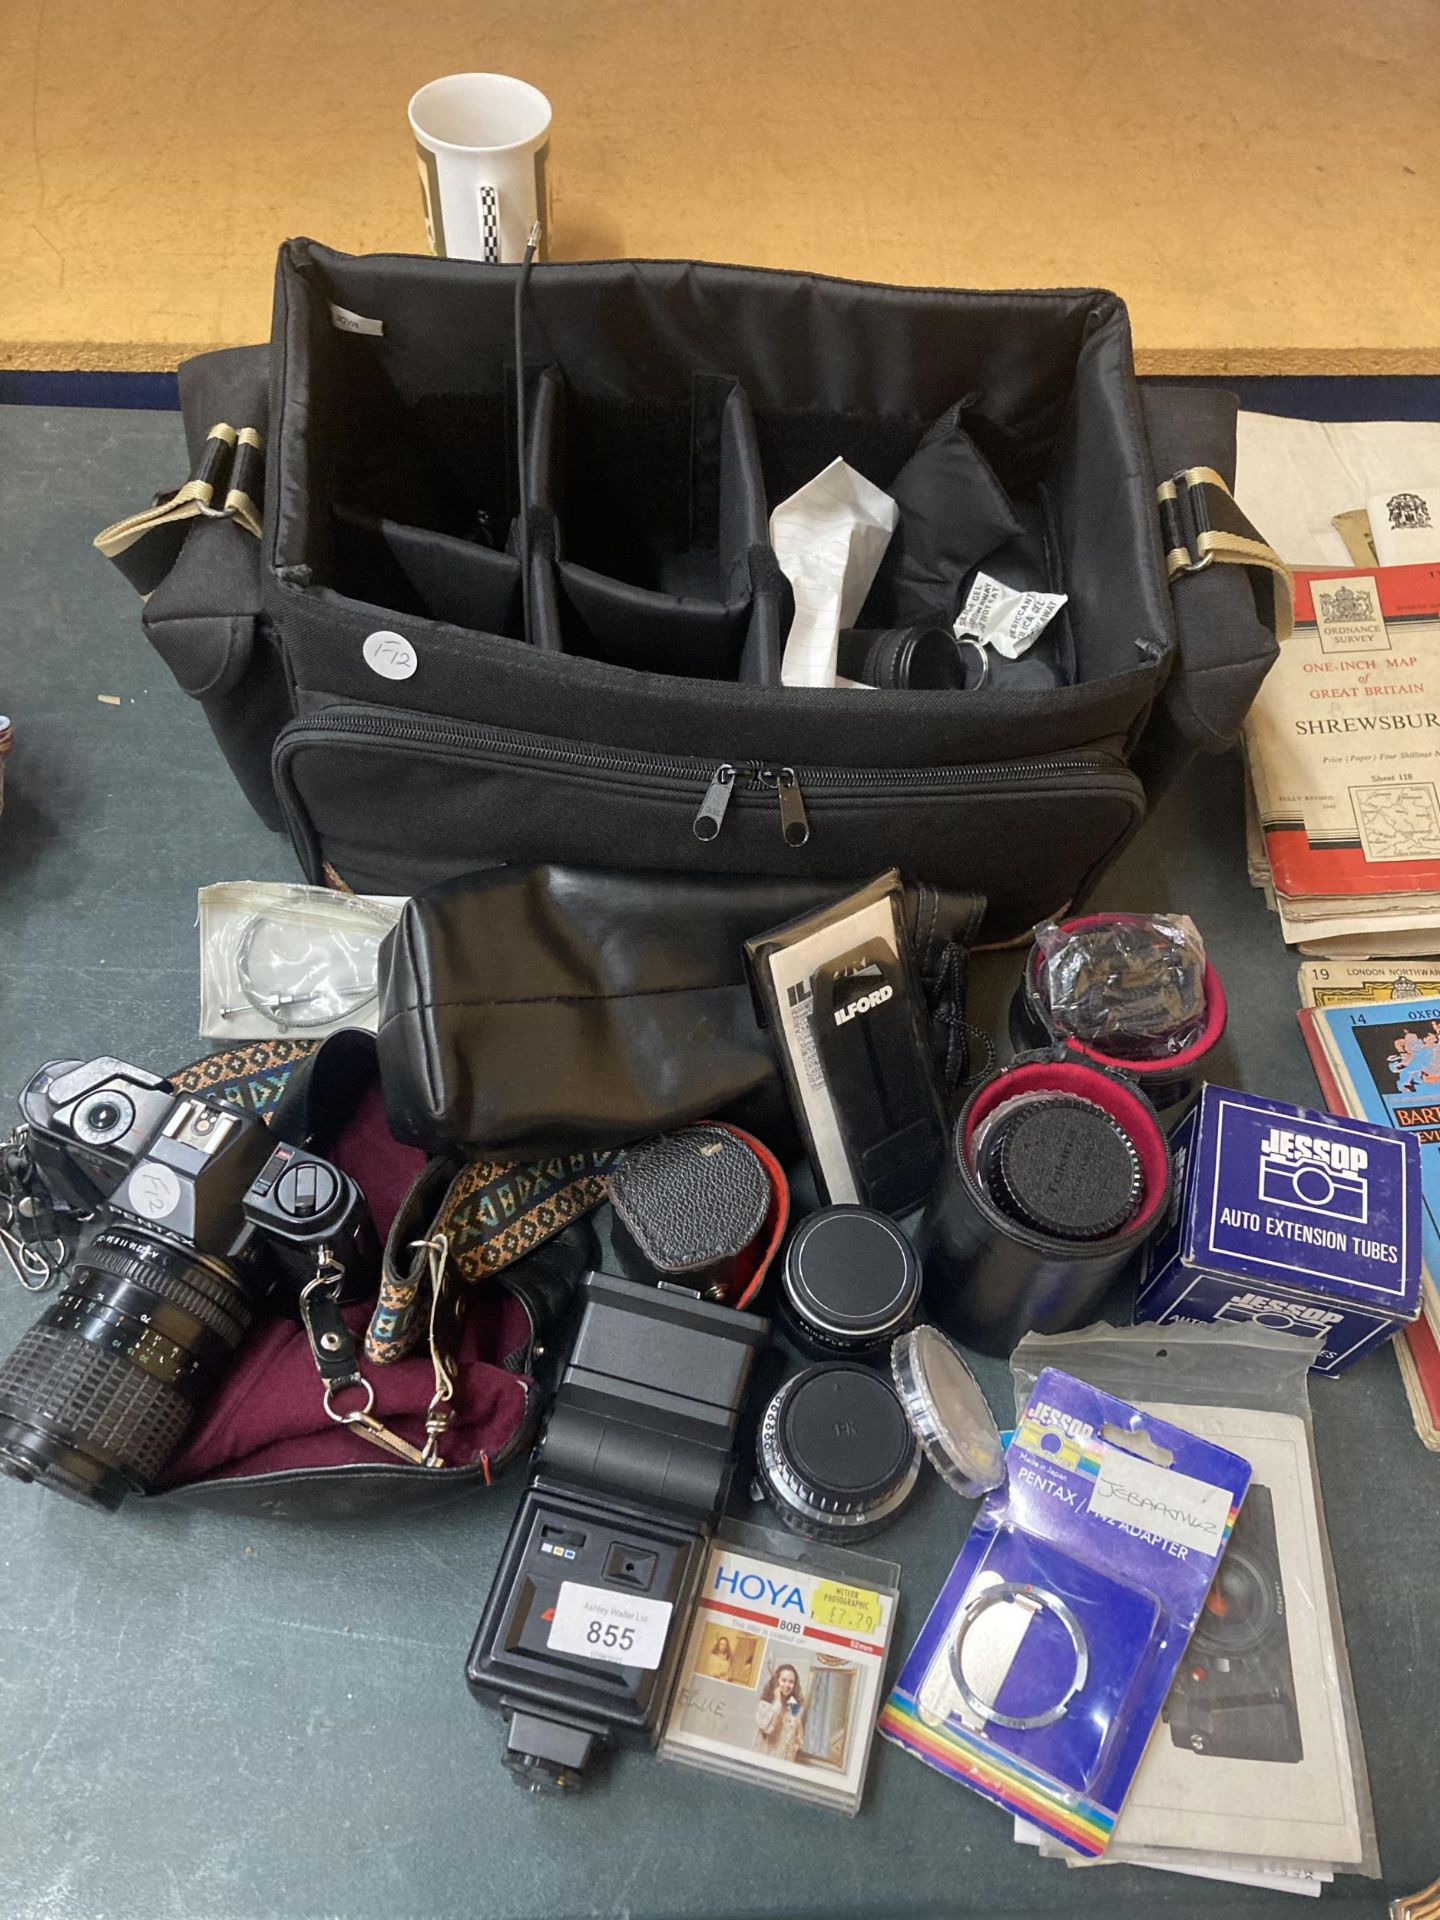 A PENTAX P30 CAMERA, LENSES, FLASH, EXTENSION TUBES, FILTERS, INSTRUCTIONS, ETC, ALL CASED IN A